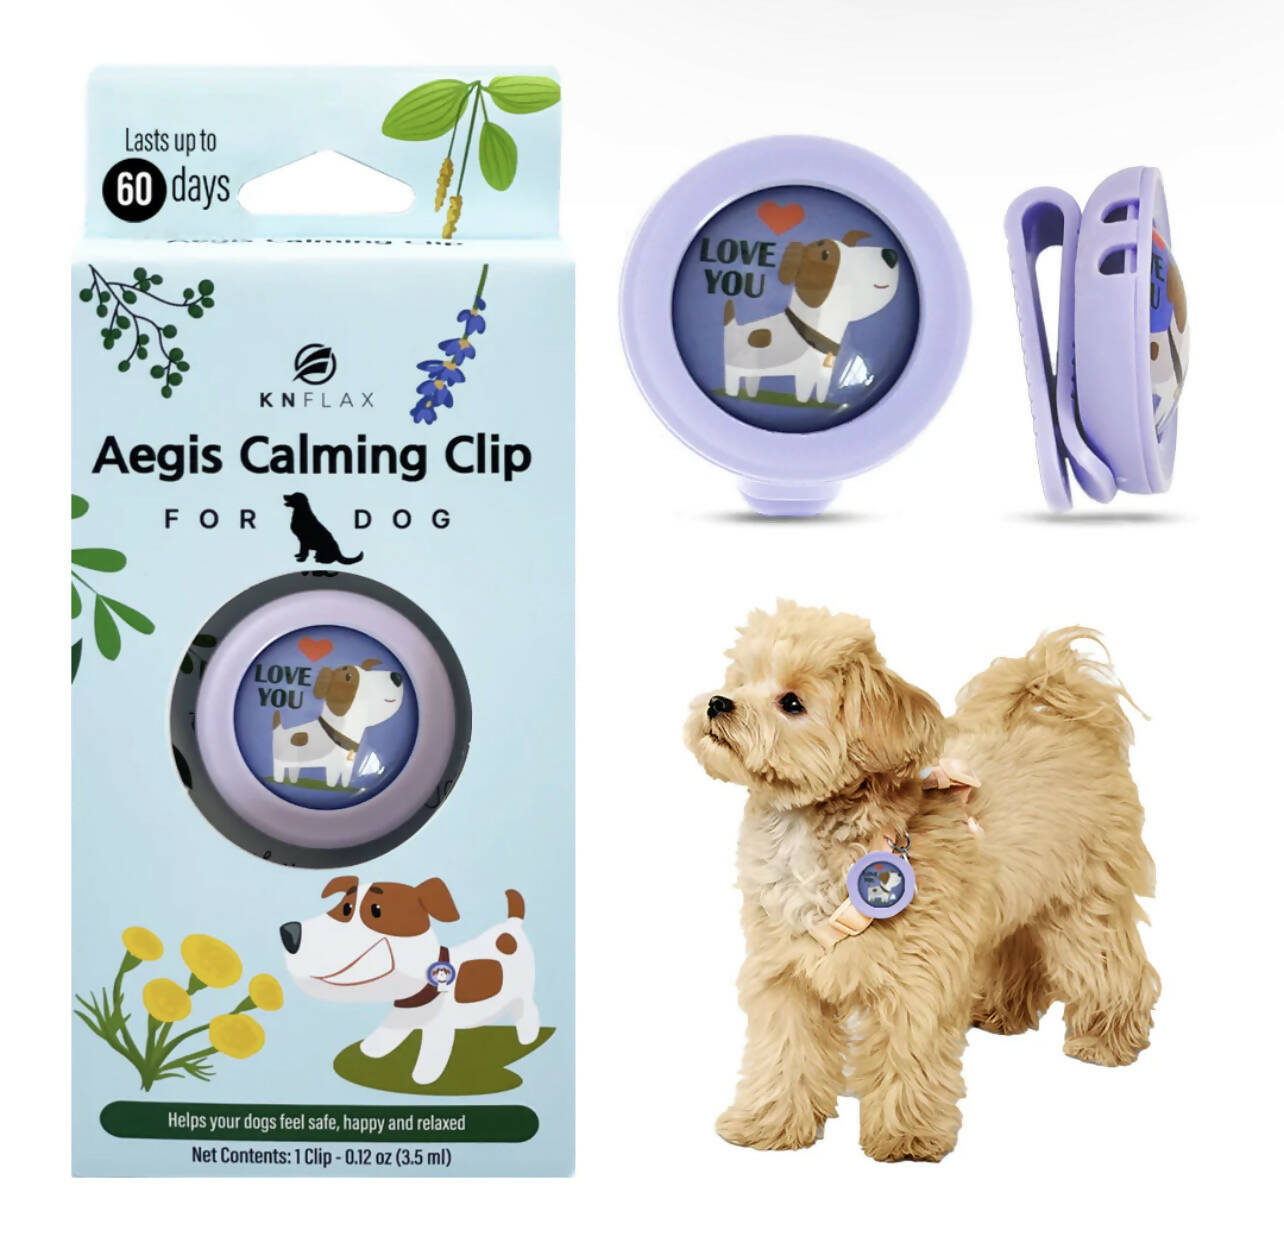 AEGIS CALMING CLIP FOR DOG | 100% NATURAL OIL HELPS YOUR DOGS FEEL SAFE AND HAPPY